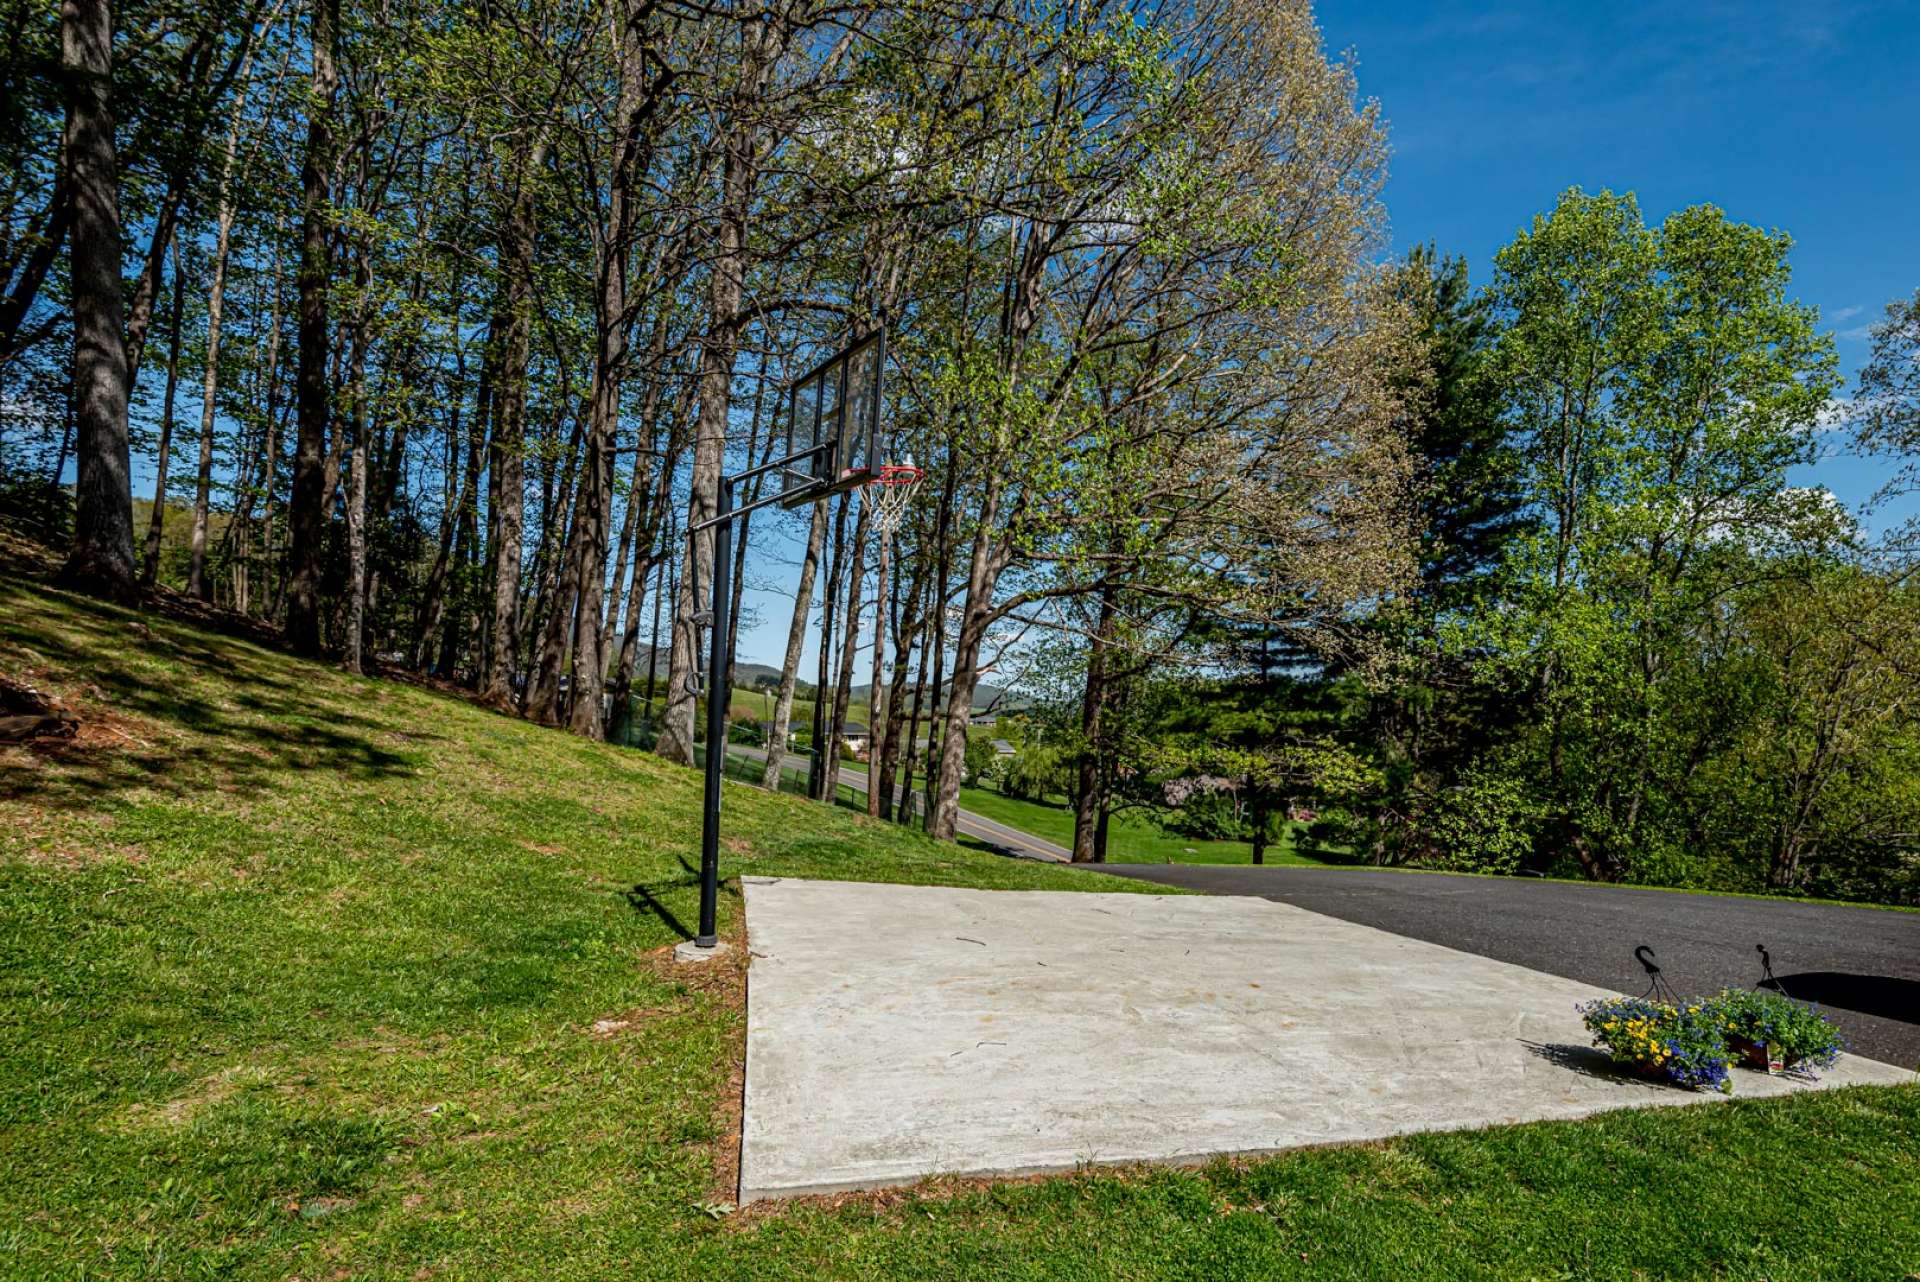 The back yard offers a great place for outdoor sports and entertaining.